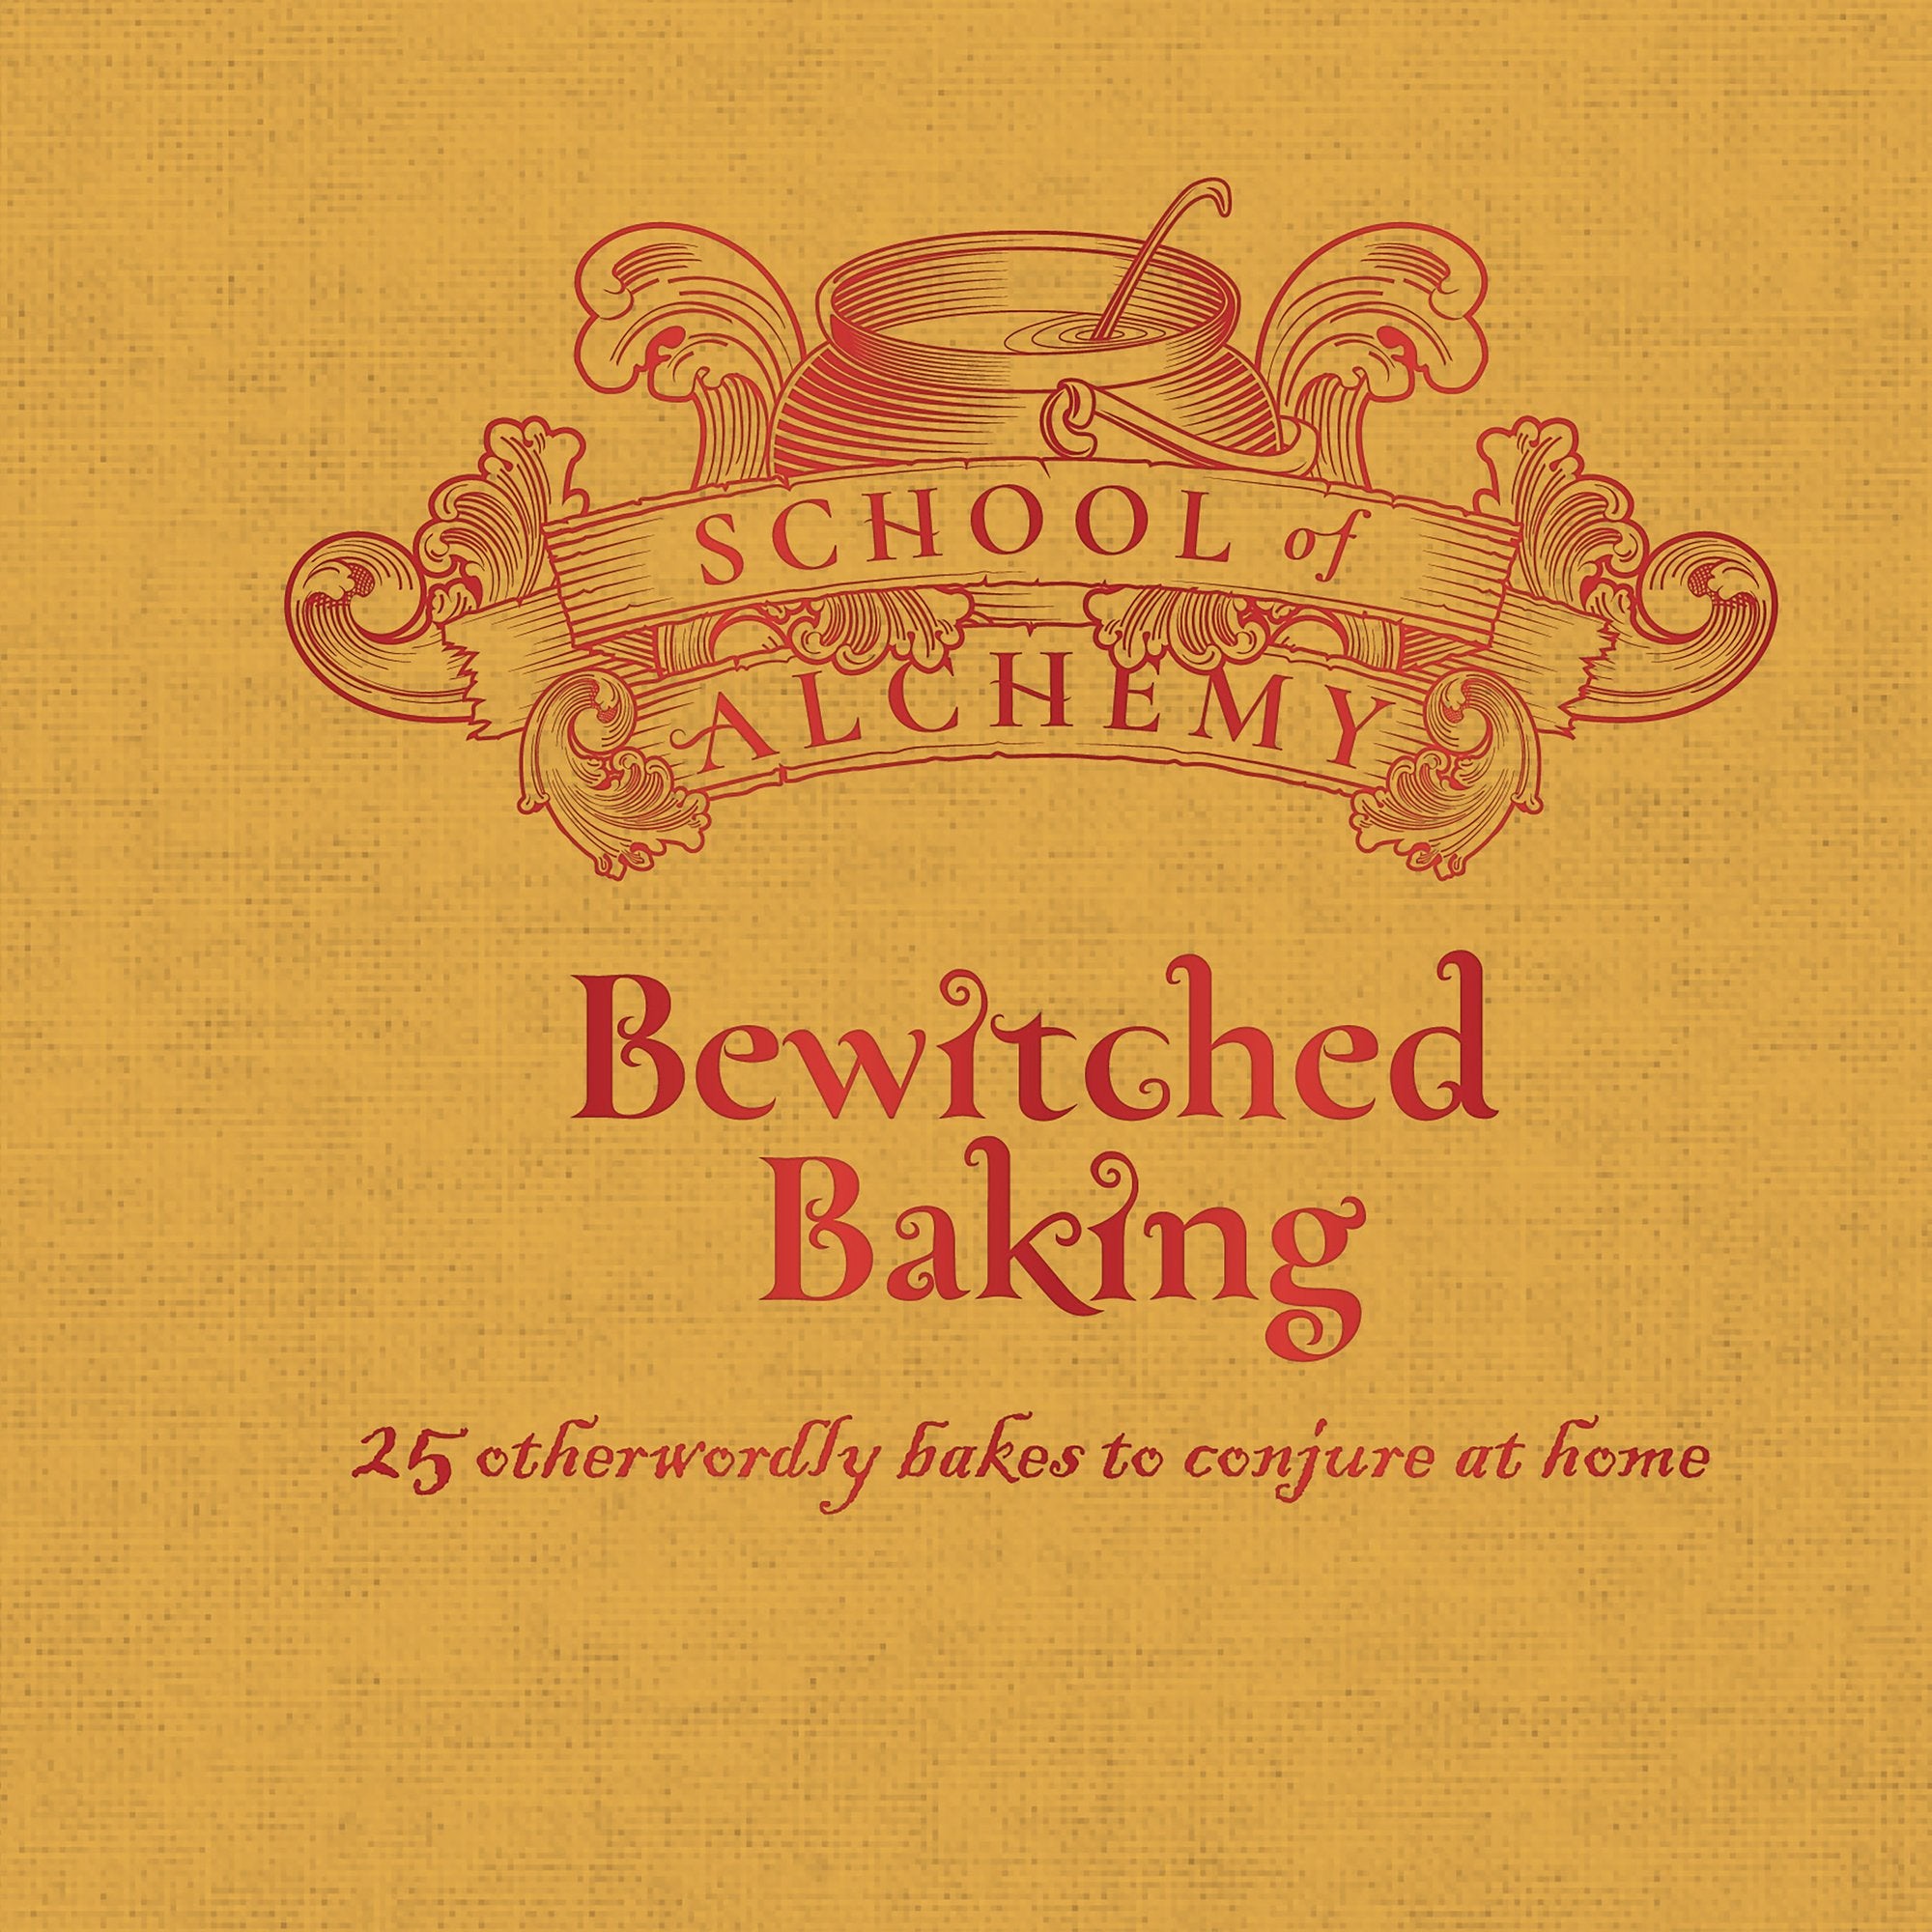 School of Alchemy: Bewitched Baking